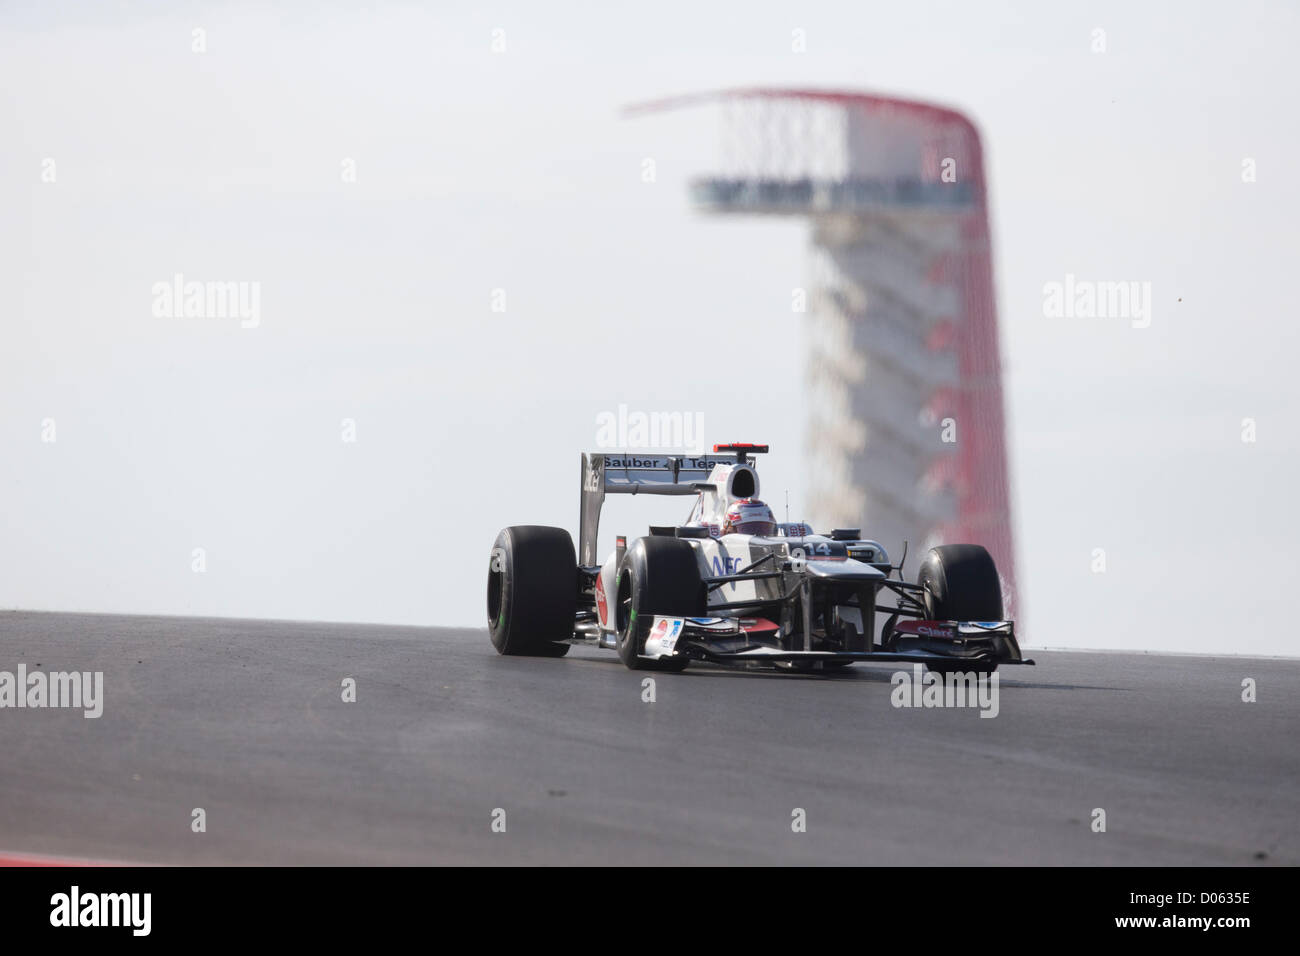 Japanese driver Kamui Kobayashi heads through turn 9 at the Circuit of the Americas in the Formula 1 United States Grand Prix Stock Photo